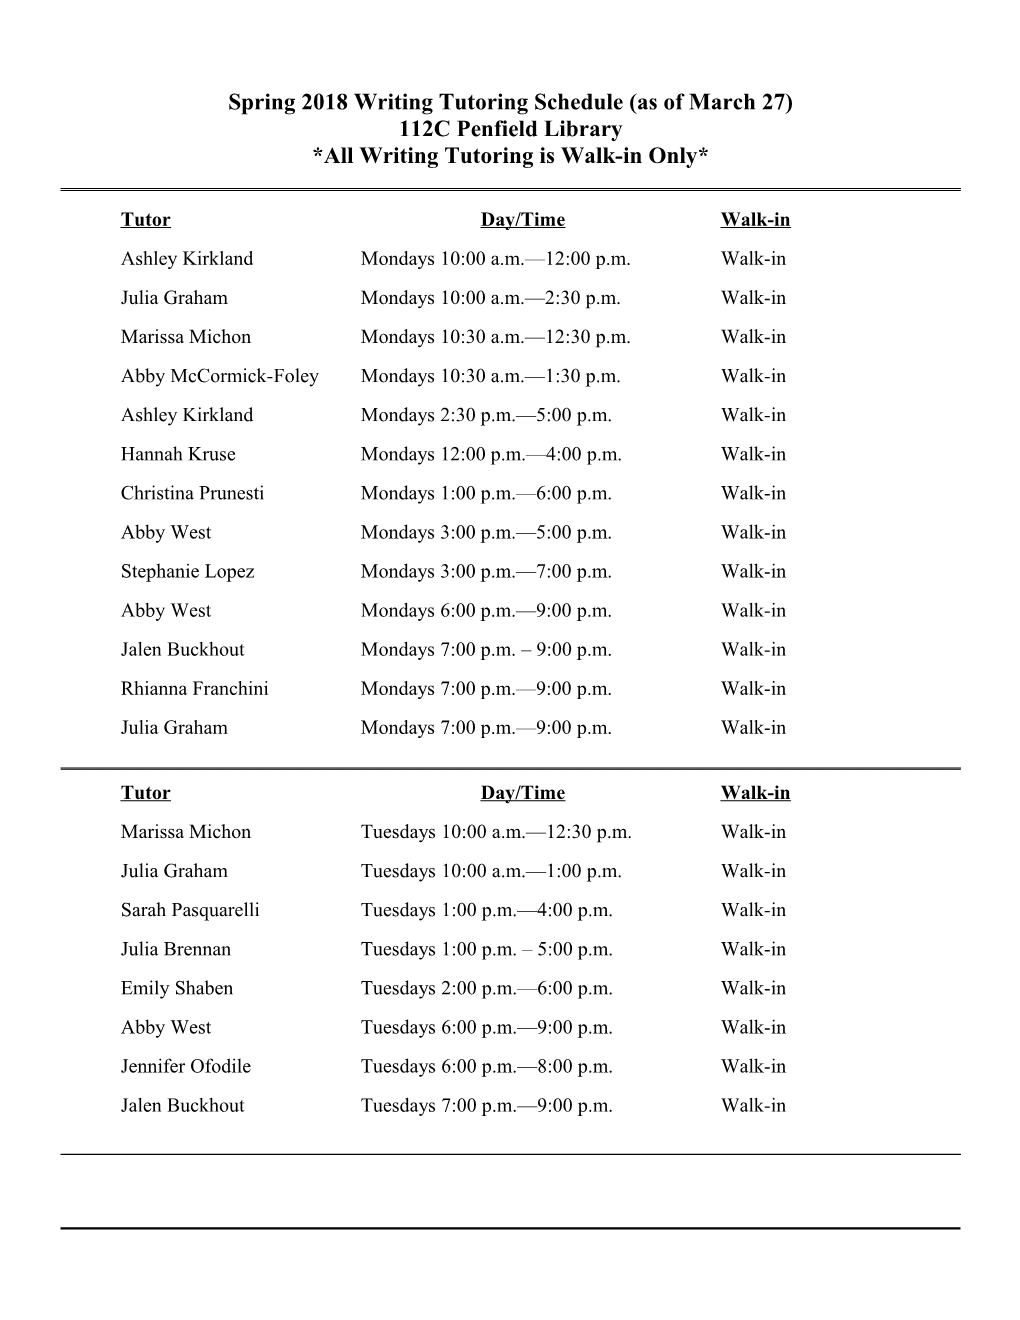 Spring 2018 Writing Tutoring Schedule (As of March 27)